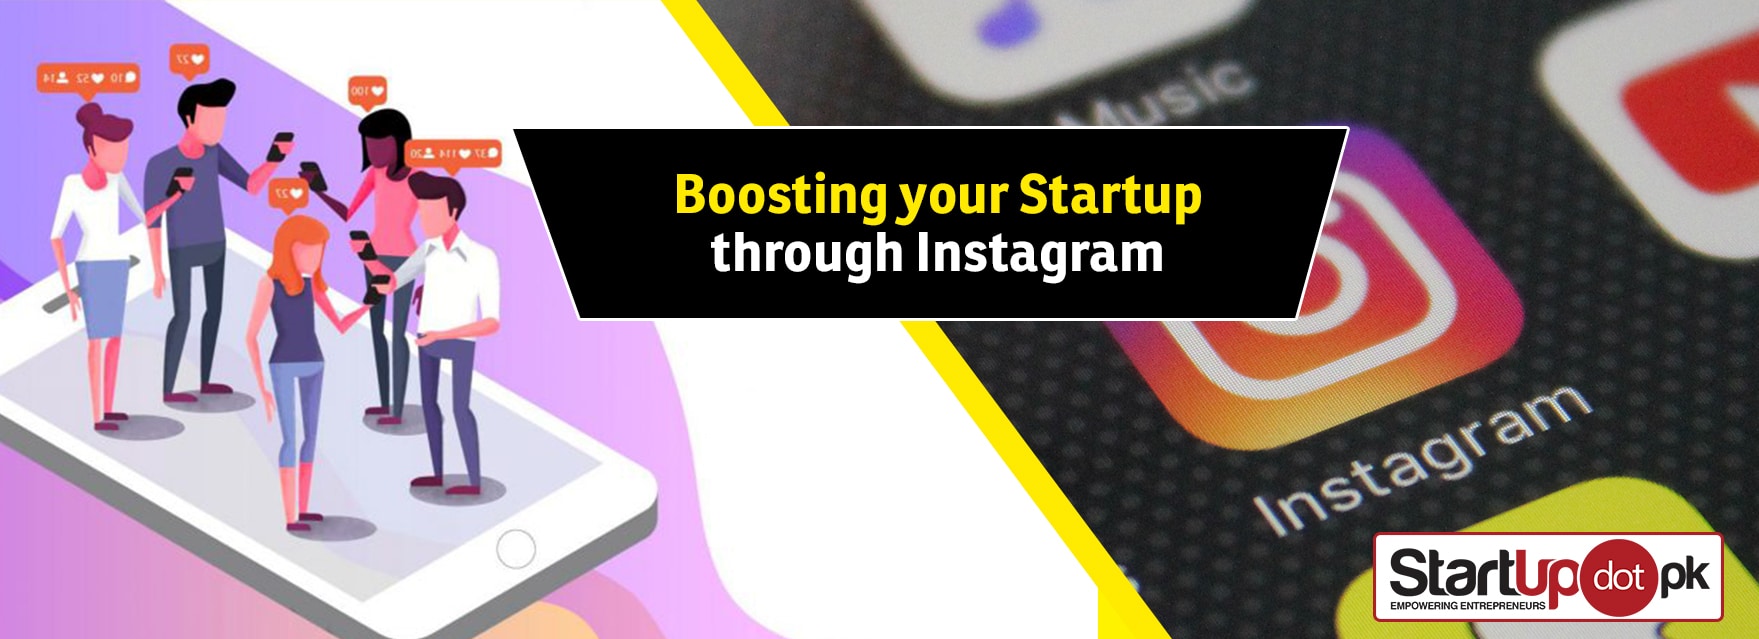 Boosting Your Startup thorough instagram